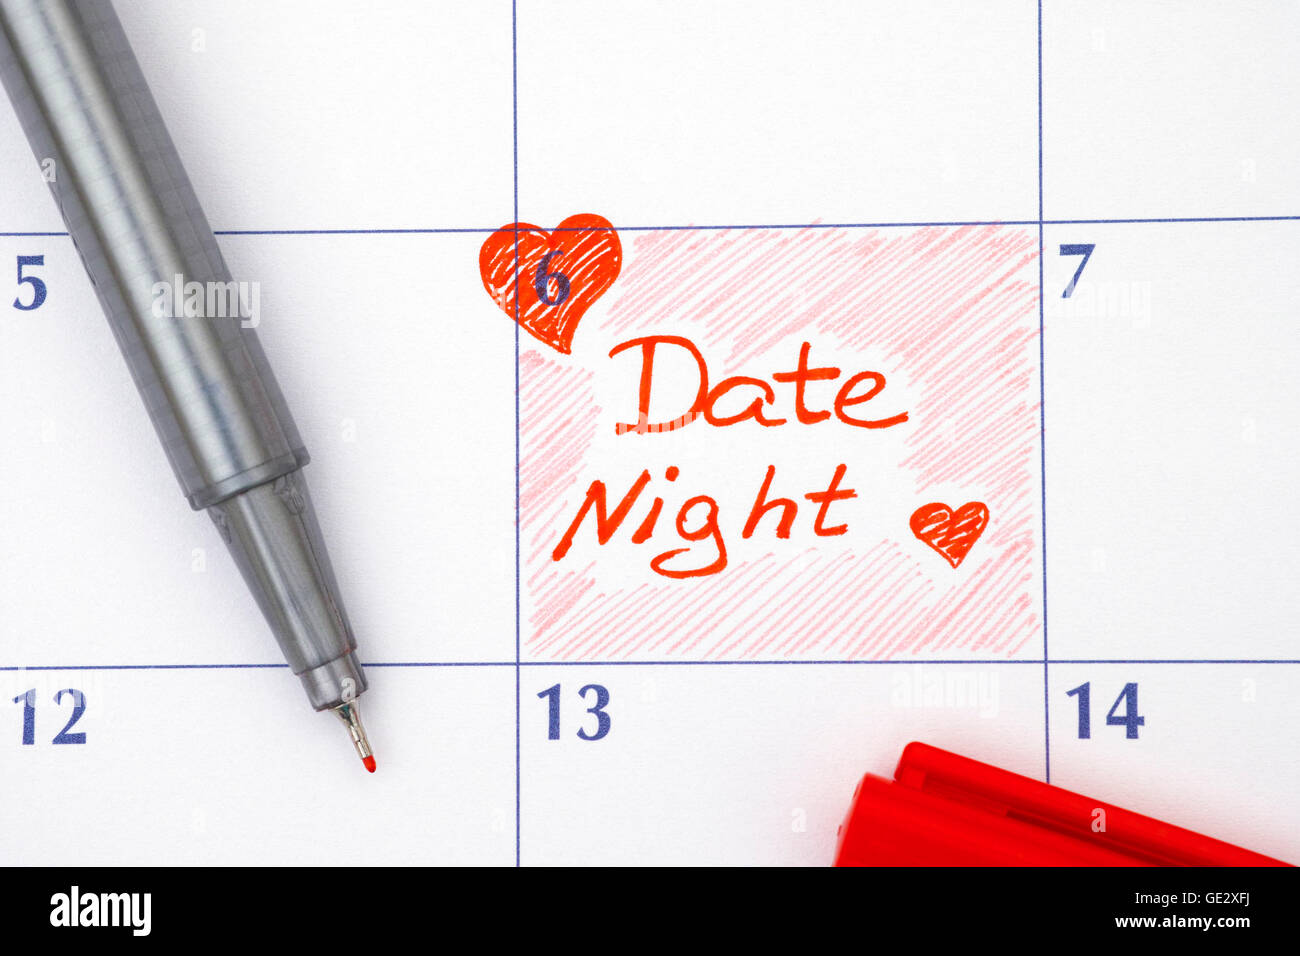 Reminder Date Night in calendar with red pen Stock Photo